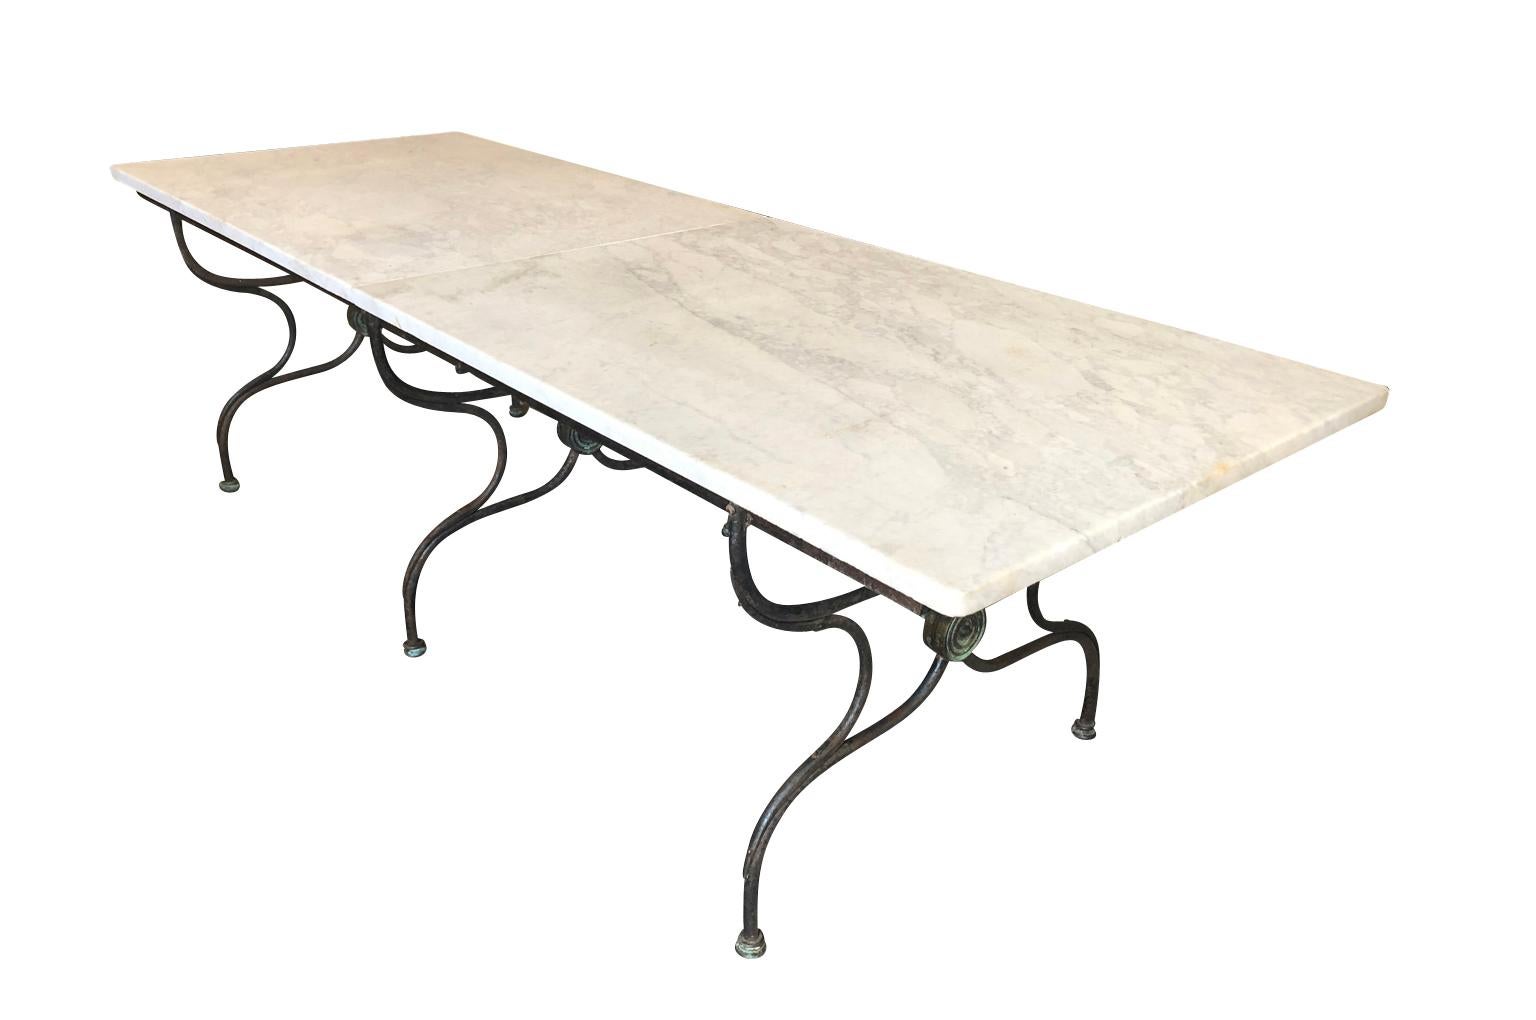 An outstanding and monumental garden dining table from the Provence region of France. Soundly crafted from iron and a wonderful Carrara white marble top. The top is in 2 pieces. Perfect for interior or exterior dining.